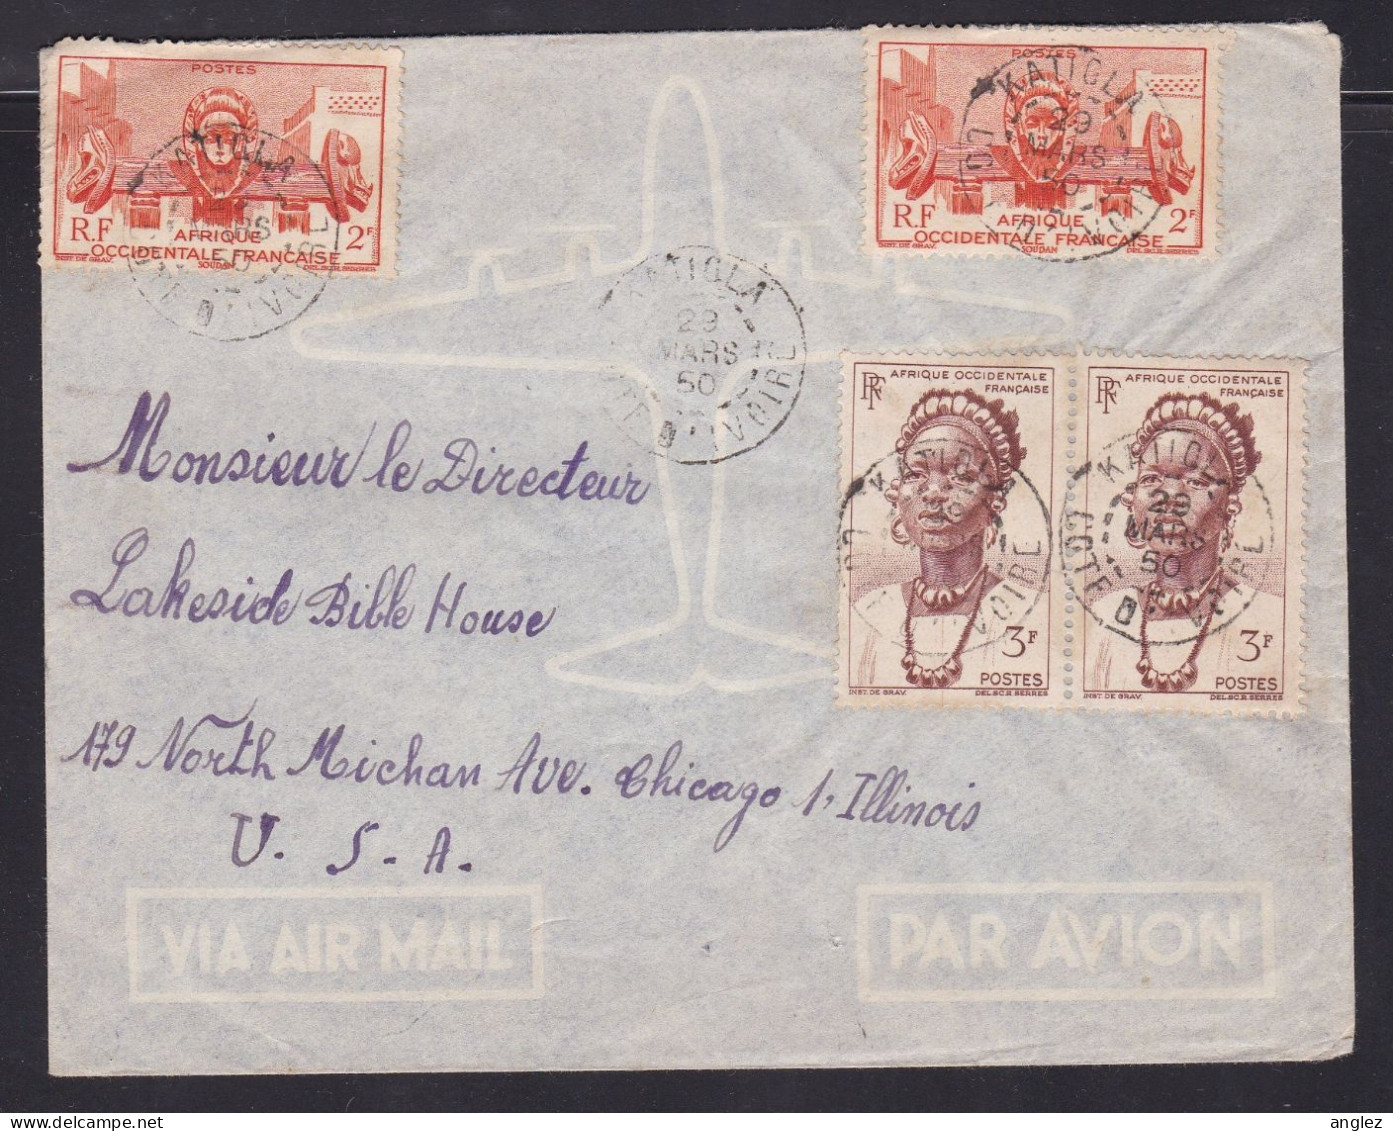 France / AOF / Cote D'Ivoire / Ivory Coast - 1950 Airmail Cover Katiola To Chicago USA - Lettres & Documents